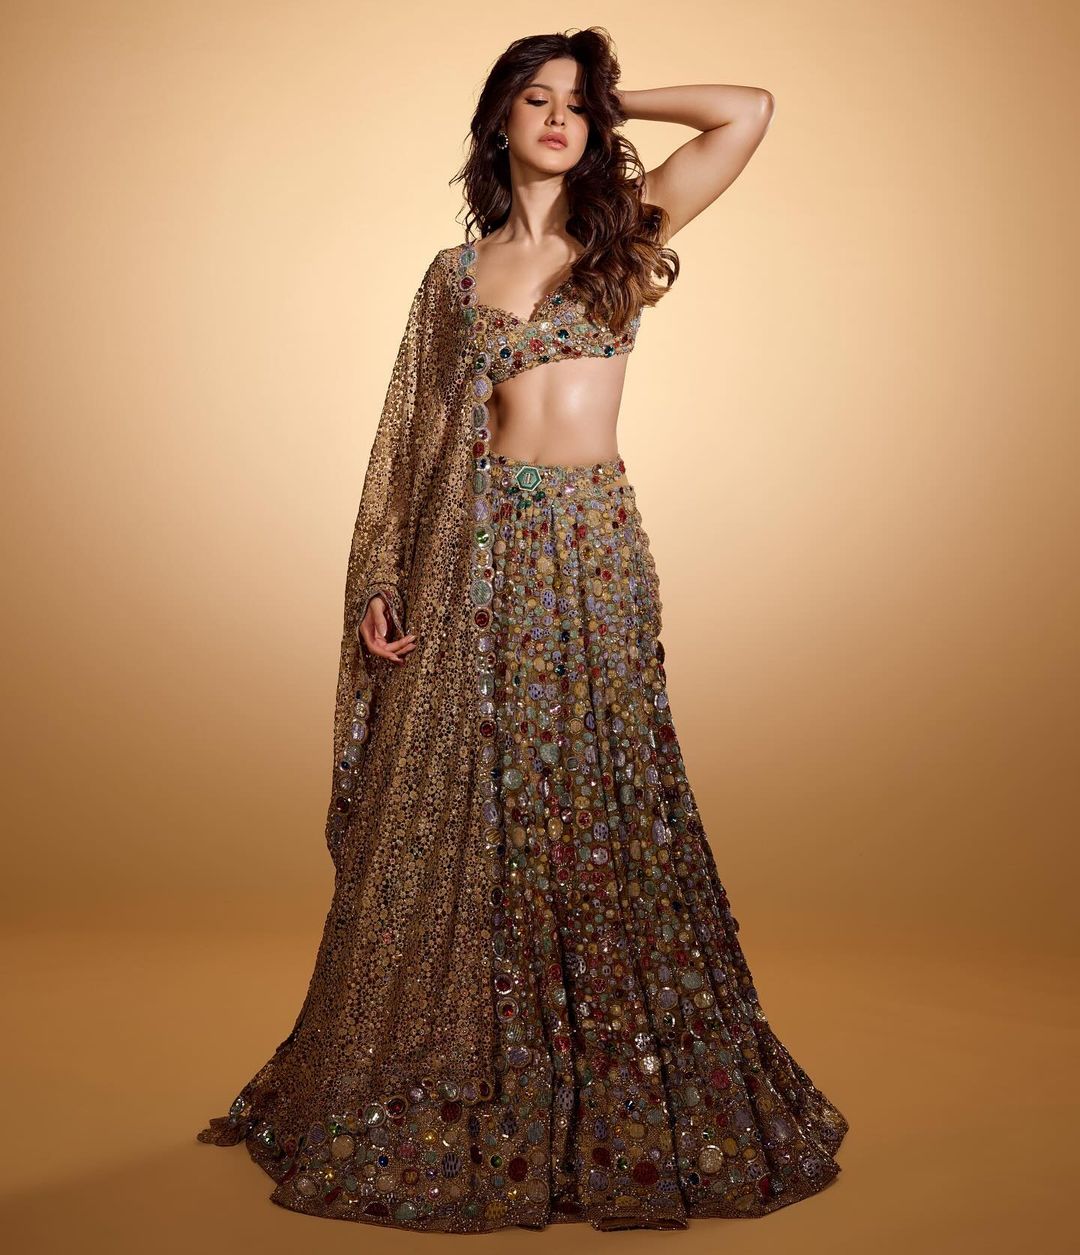 Shanaya Kapoor continues to set fashion standards with her mesmerizing lehenga look. The heavily embroidered lehenga is an ideal choice for stealing the spotlight and making a statement as the perfect bridesmaid